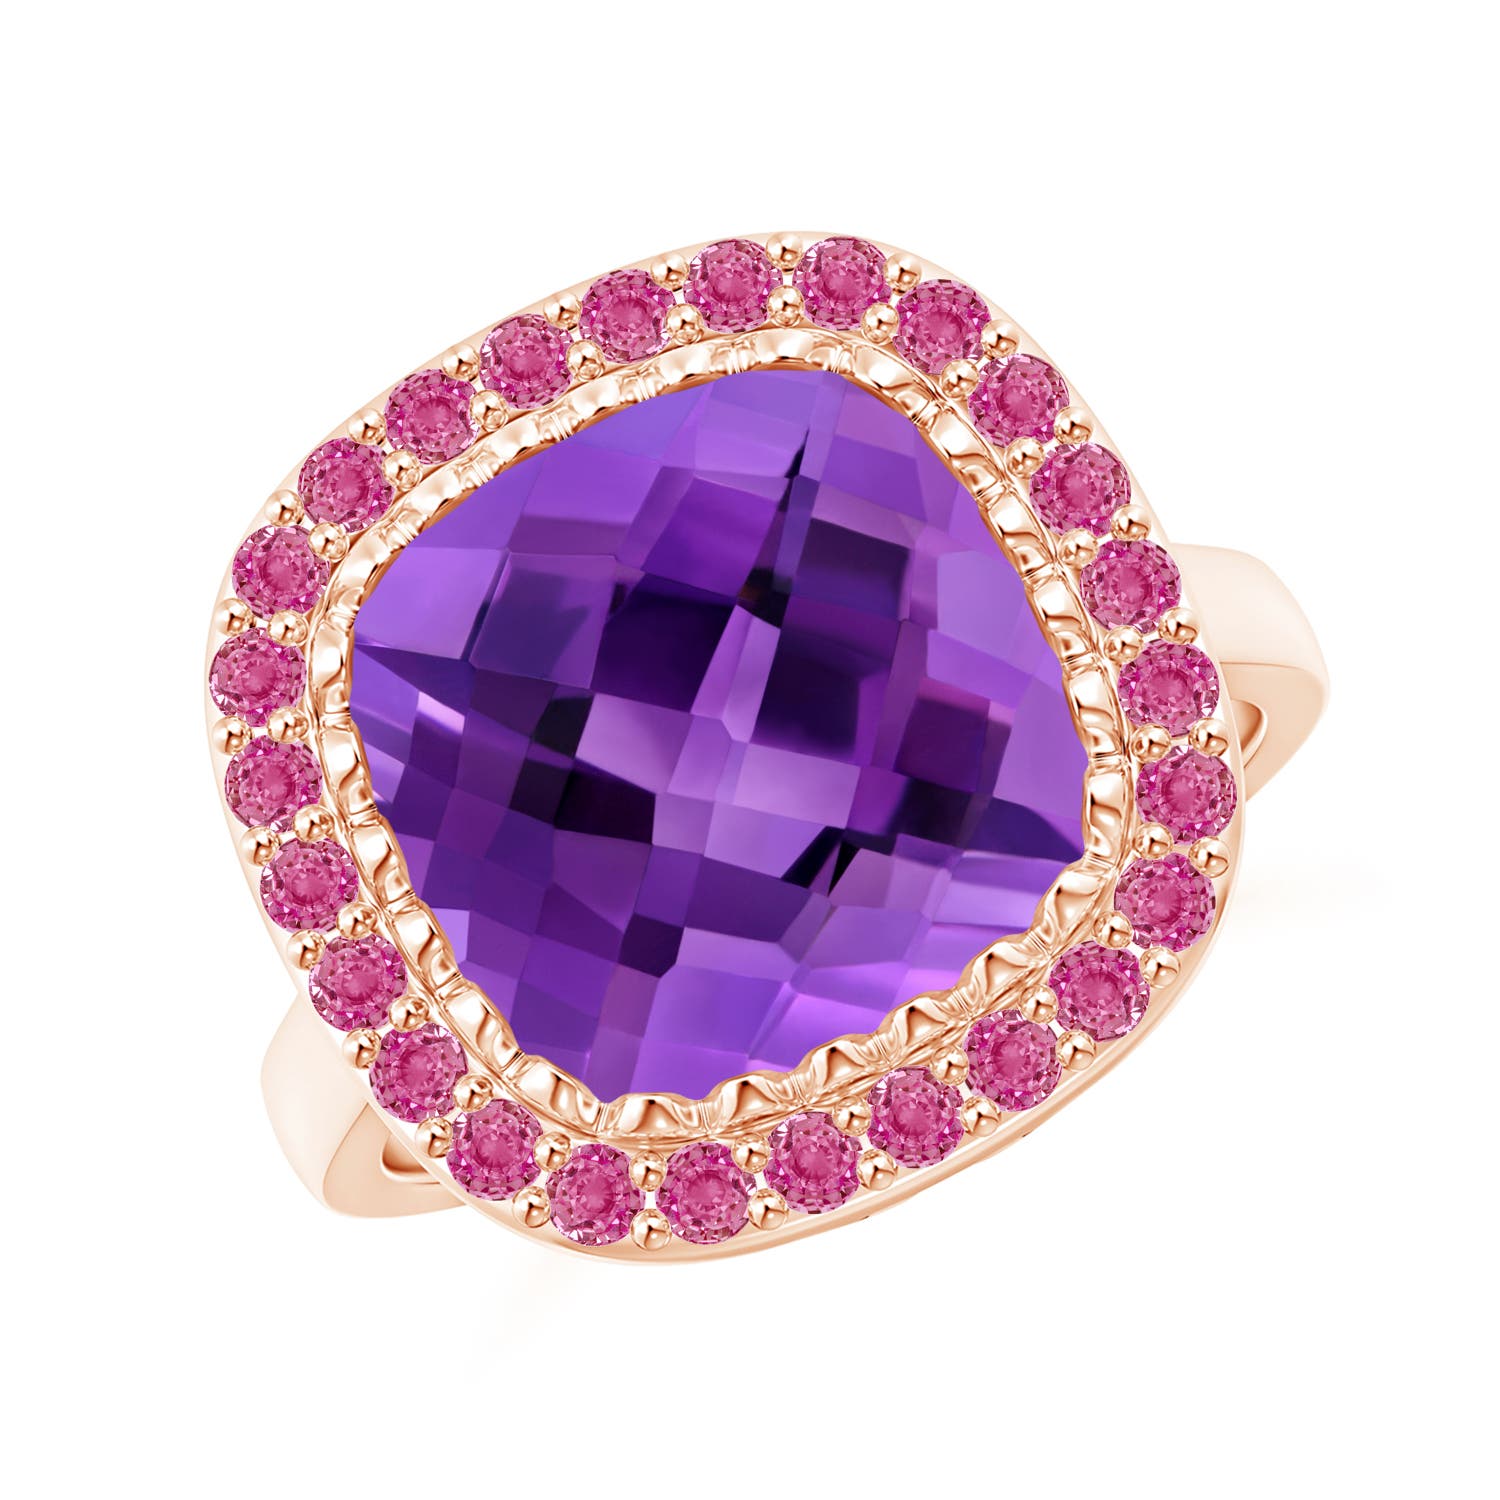 AAA - Amethyst / 5.4 CT / 14 KT Rose Gold